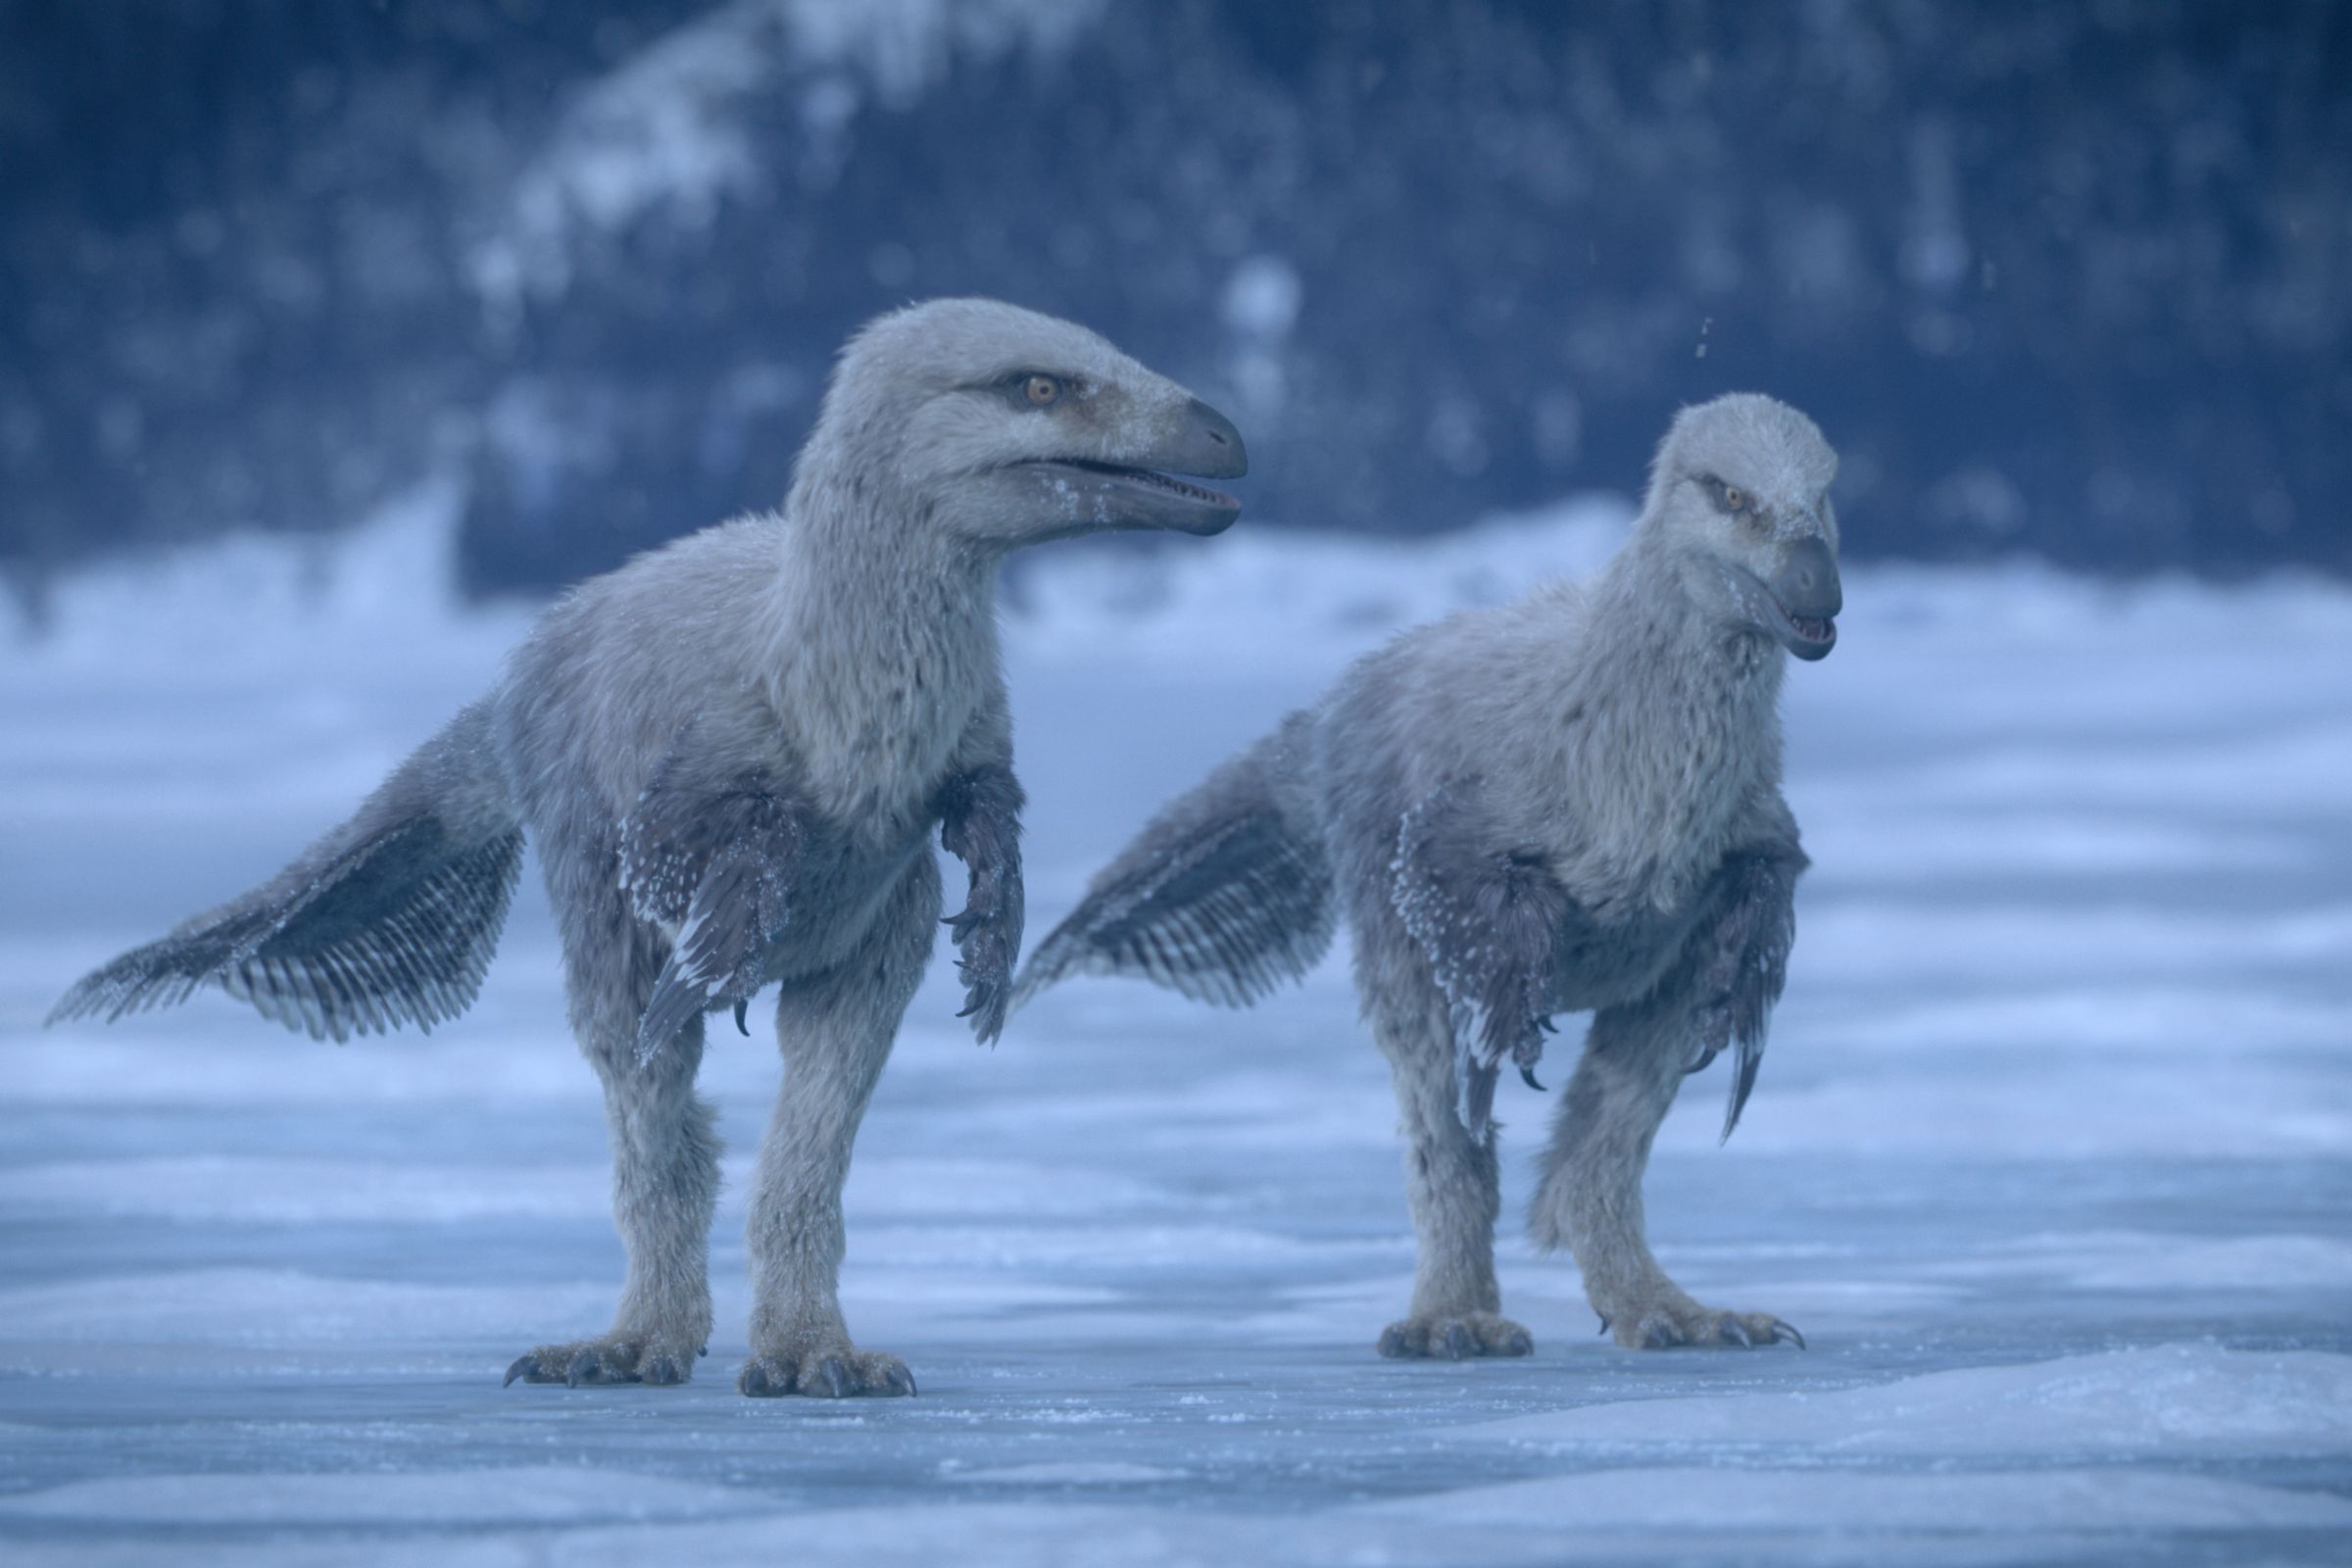 A still image of two feathery dinosaurs in the Apple TV Plus series Prehistoric Planet 2.